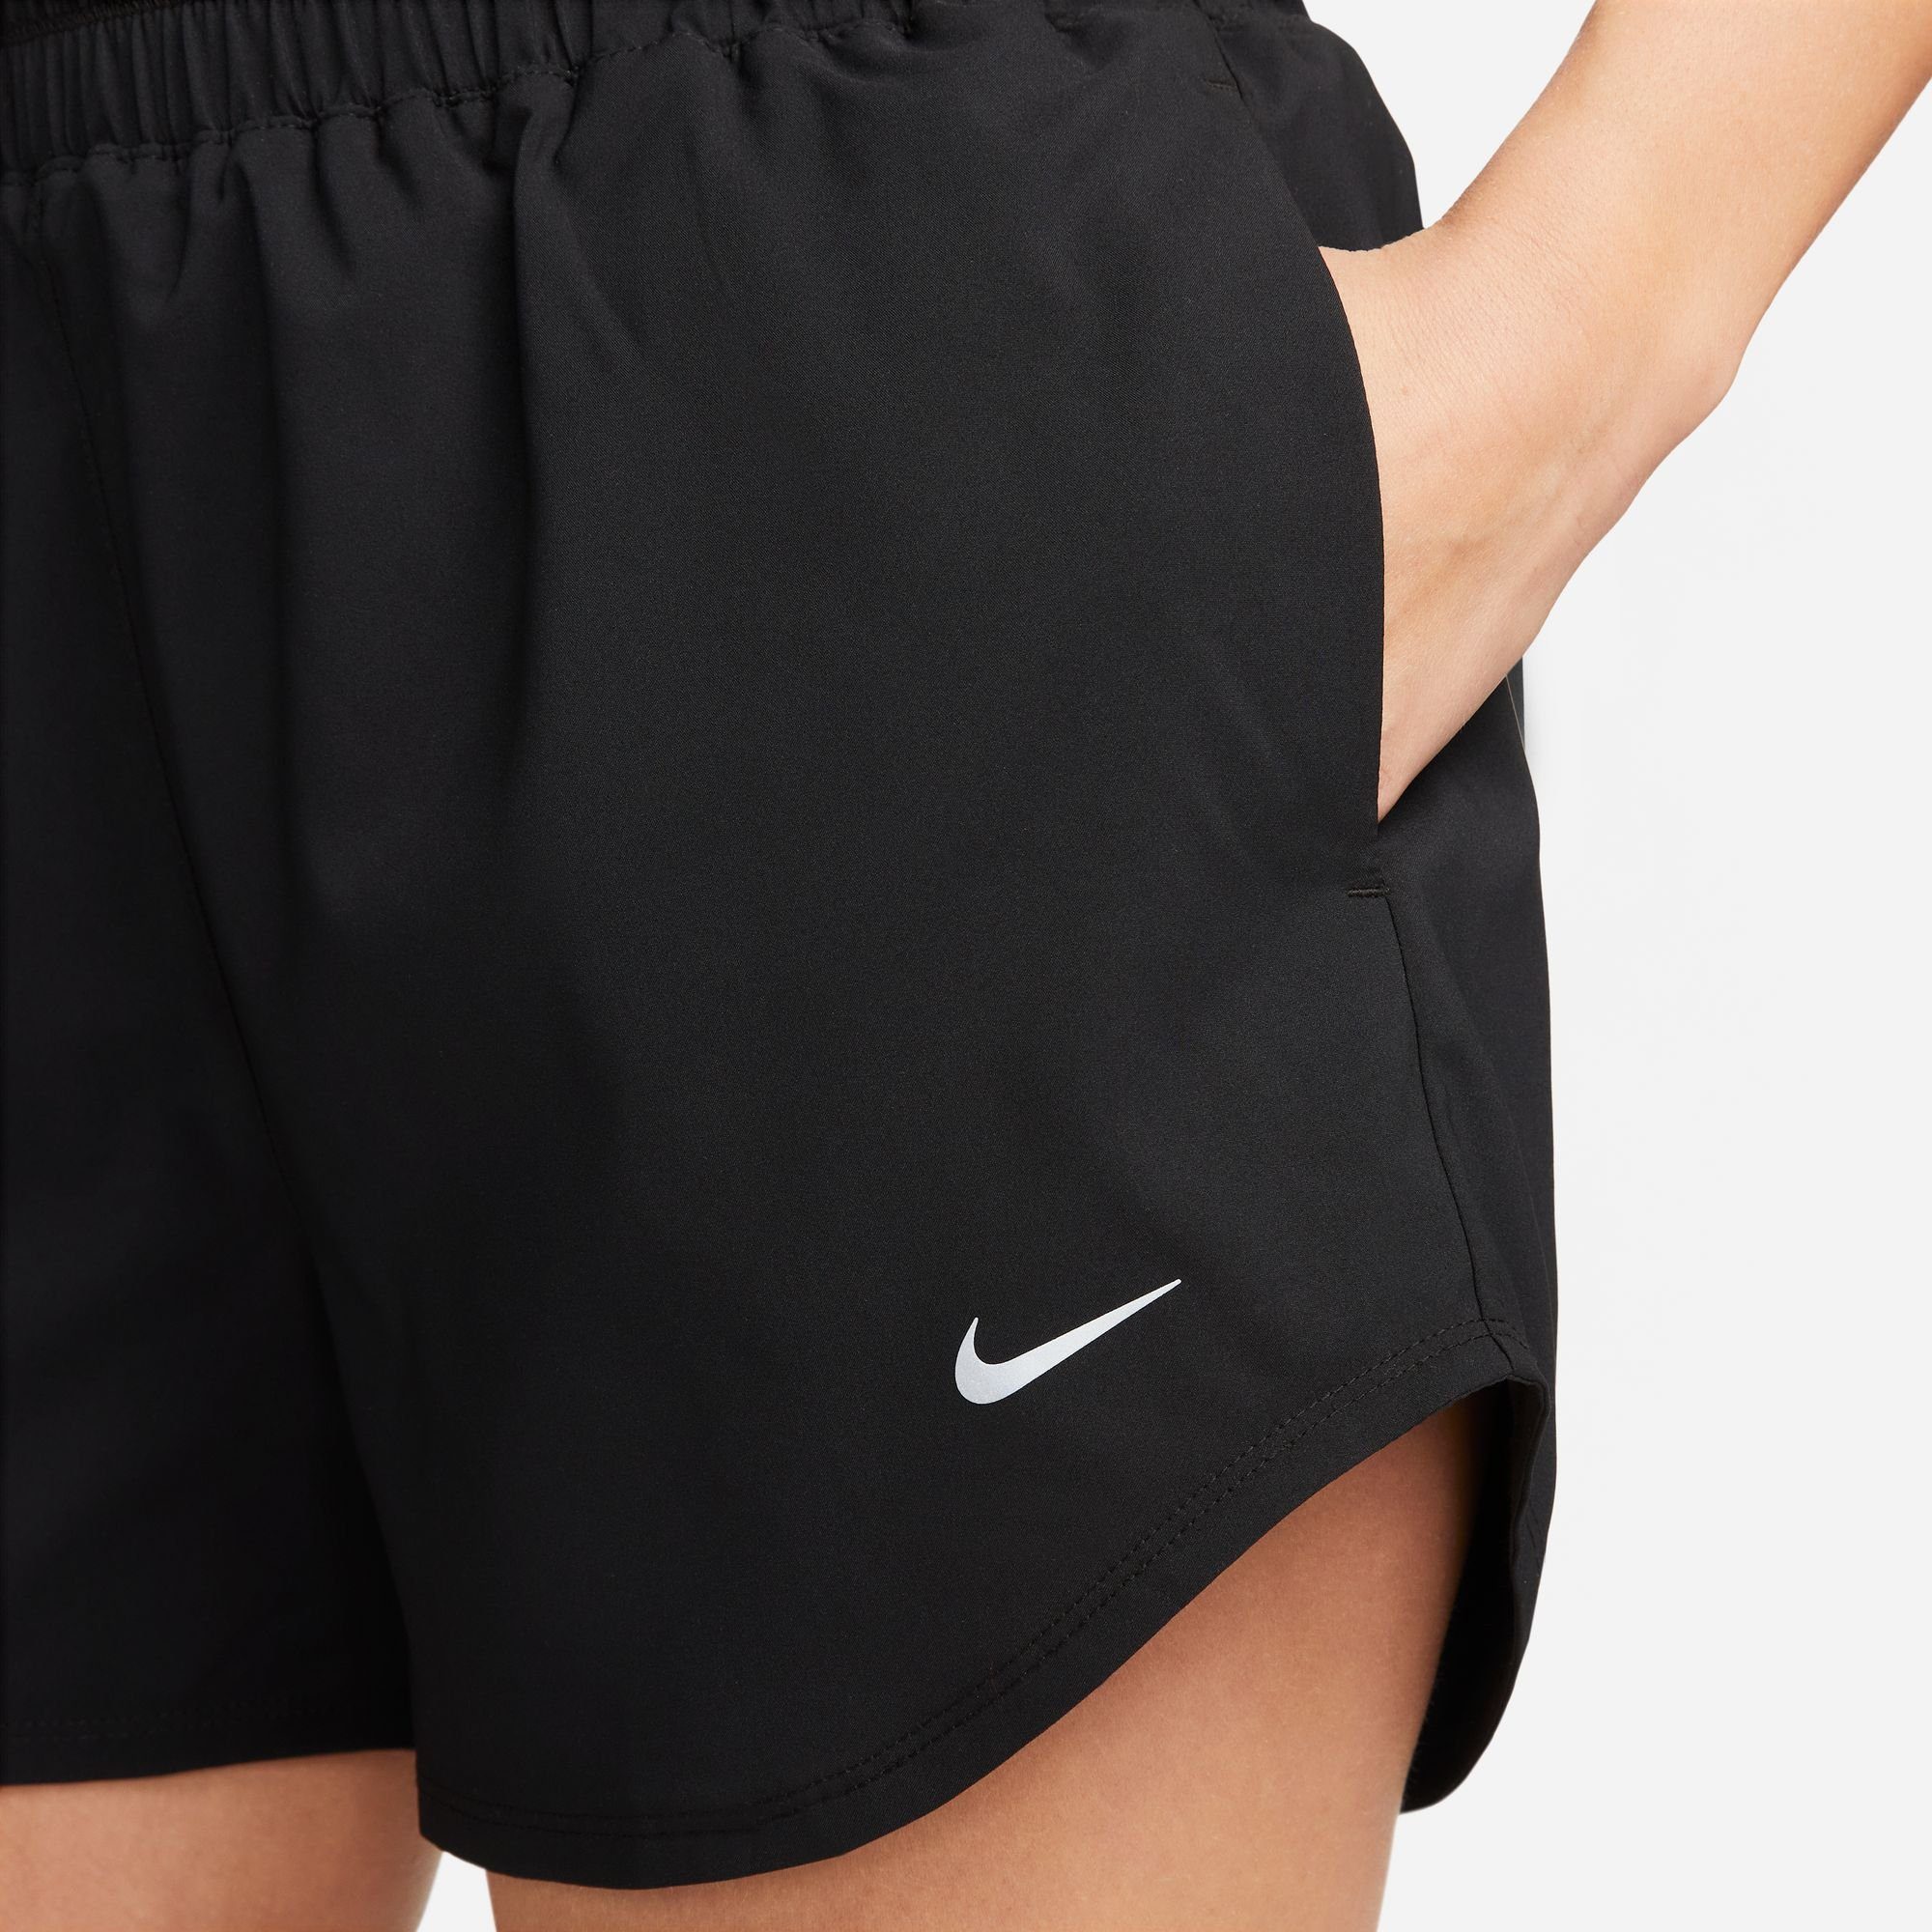 SHORTS Trainingsshorts HIGH-WAISTED Nike WOMEN'S DRI-FIT ONE ULTRA BRIEF-LINED